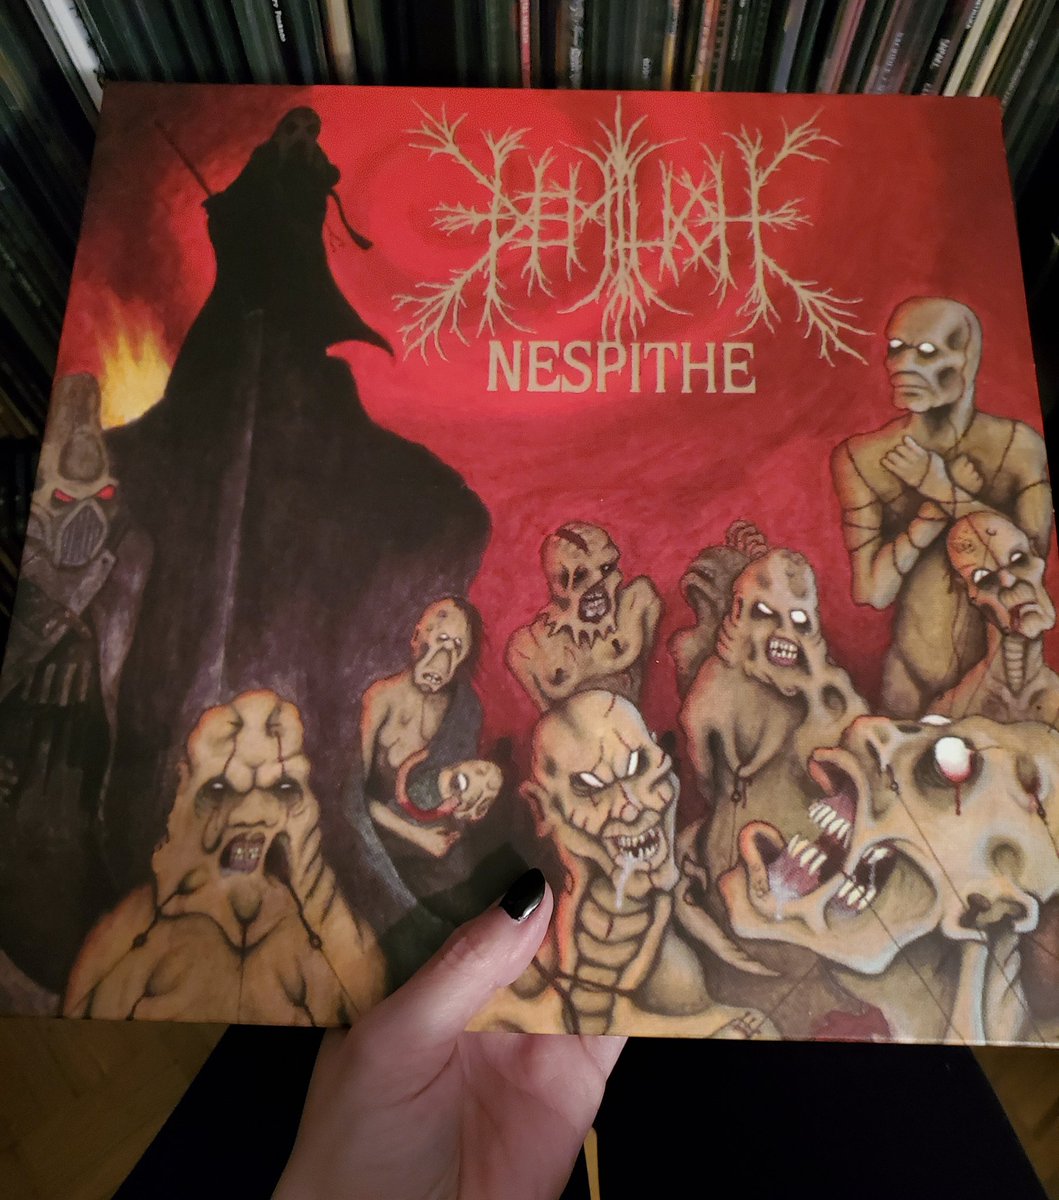 Now spinning DEMILICH Nespithe! I was totally blown away when I heard this album many years ago. A hidden gem, released in 93. A unique & impressive Death Metal album from Finland. #demilich #nespithe #deathmetal #technicaldeathmetal #finnishdeathmetal #metal #themetalheadbox